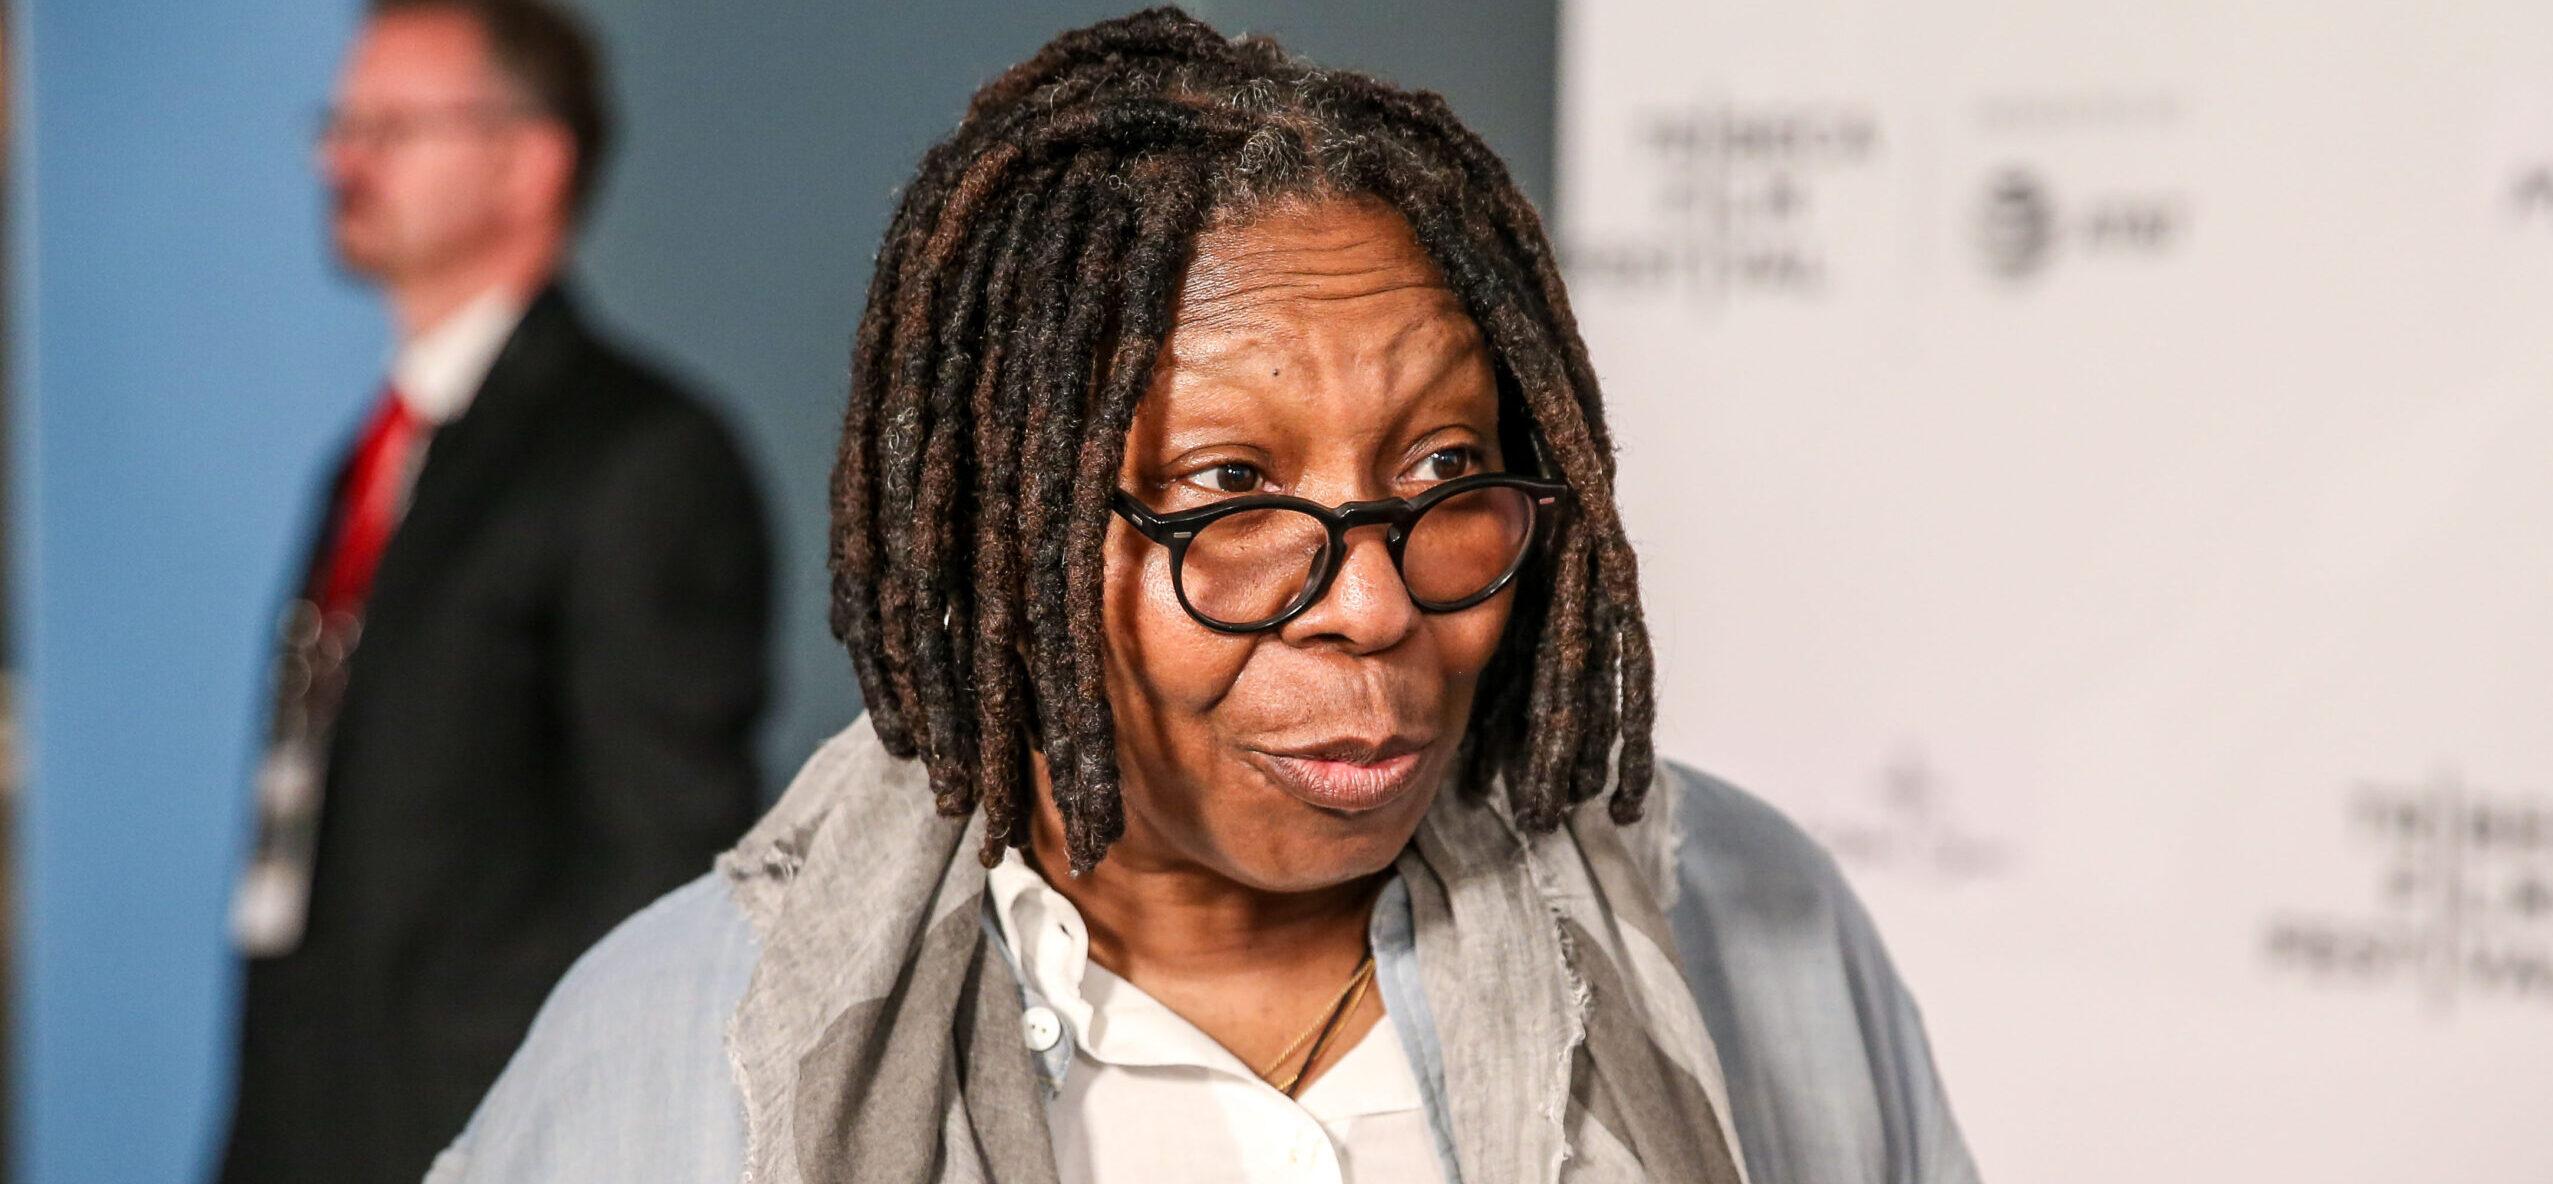 Whoopi Goldberg SLAMS Millennial Work Ethic, Says Her Generation ‘Busted Our Behinds’